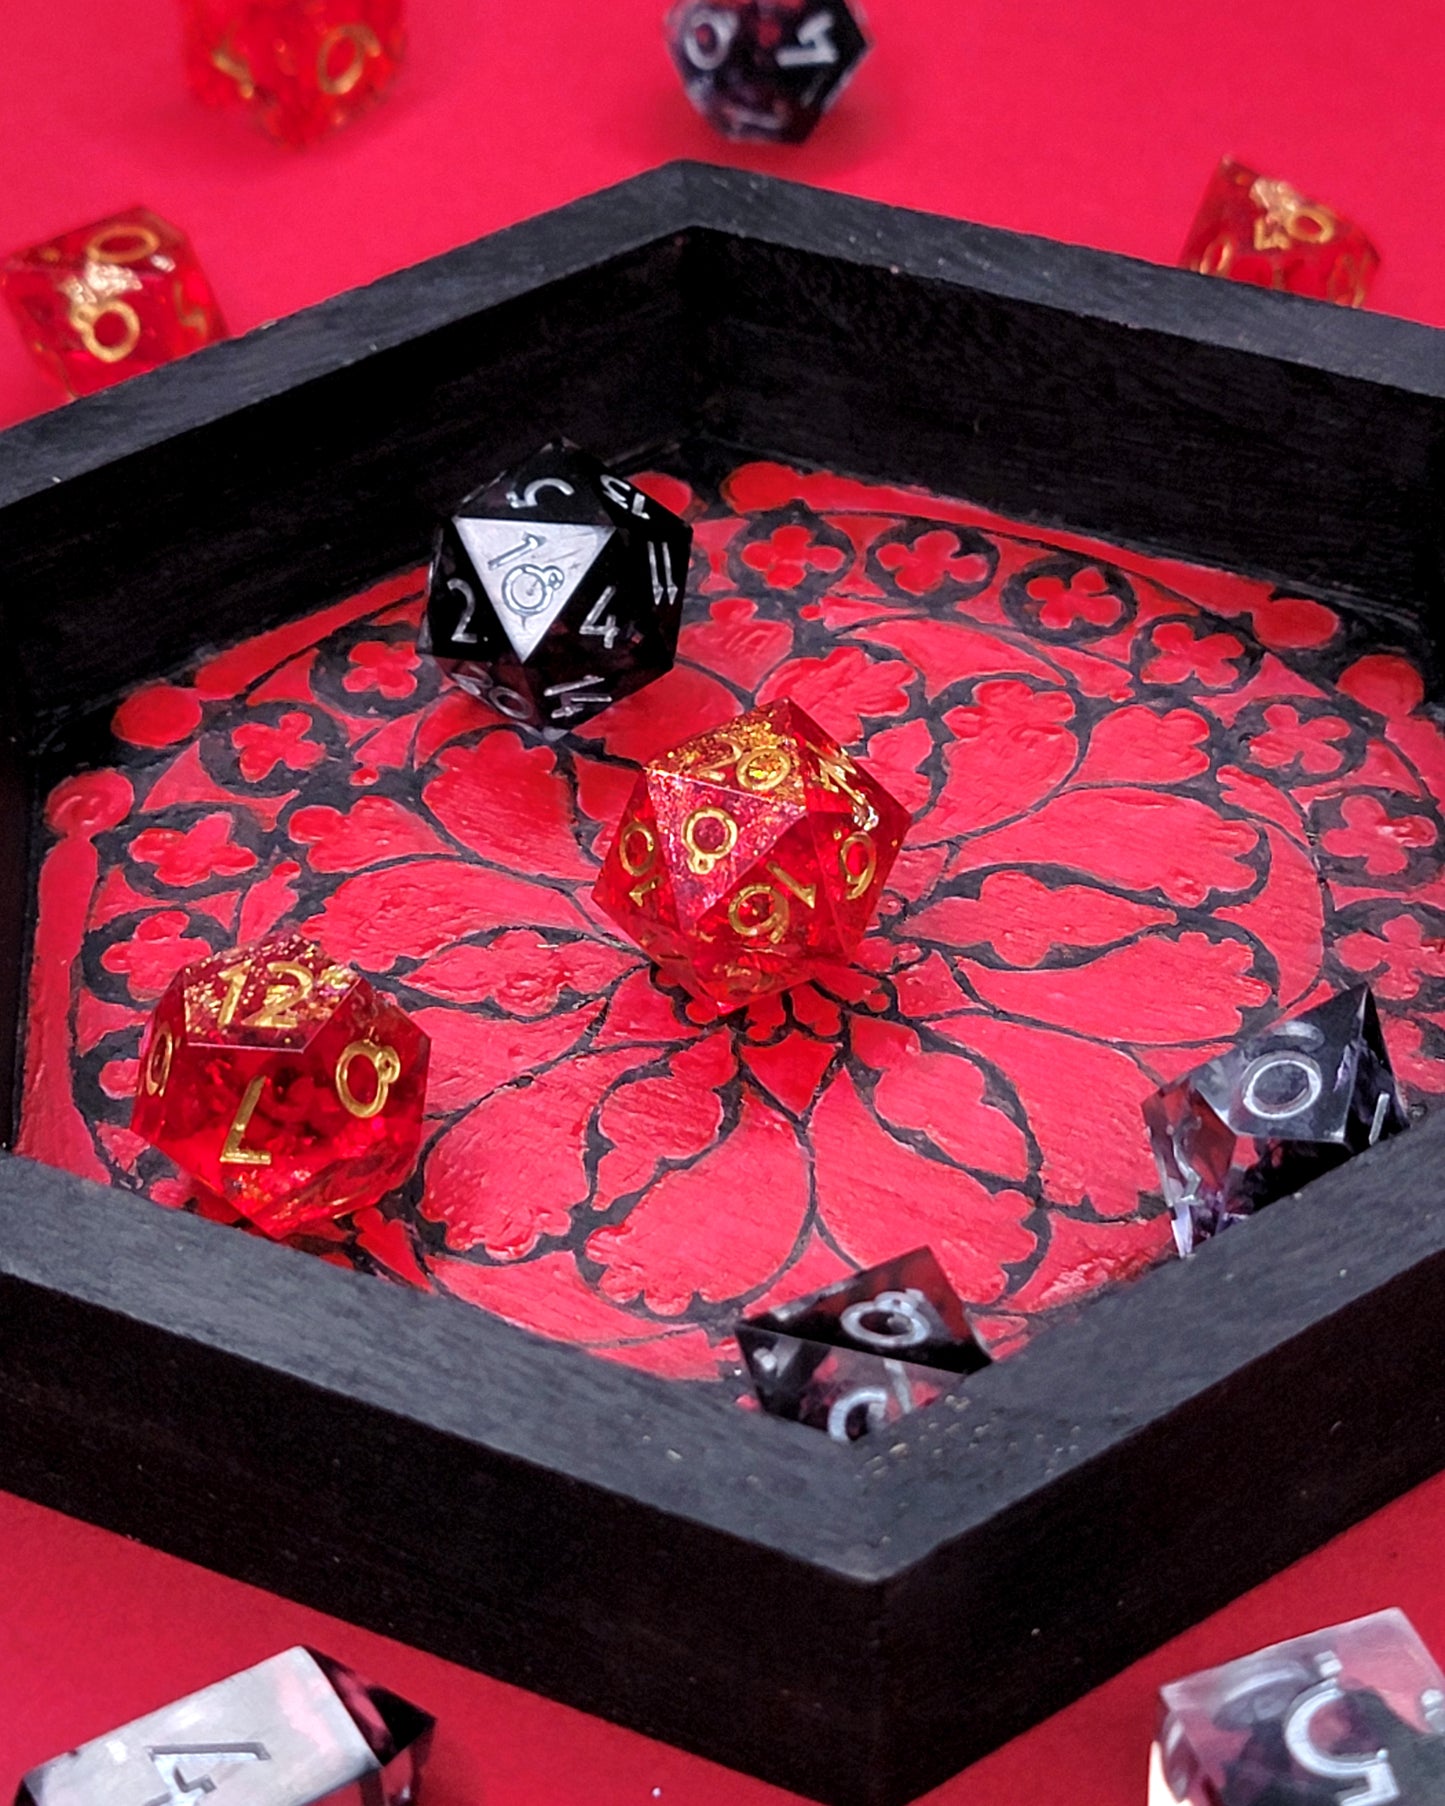 Gothic Rose - Hand-painted dice tray and wall art | Gothic wall art | Gothic Window | Hangable Dice Tray